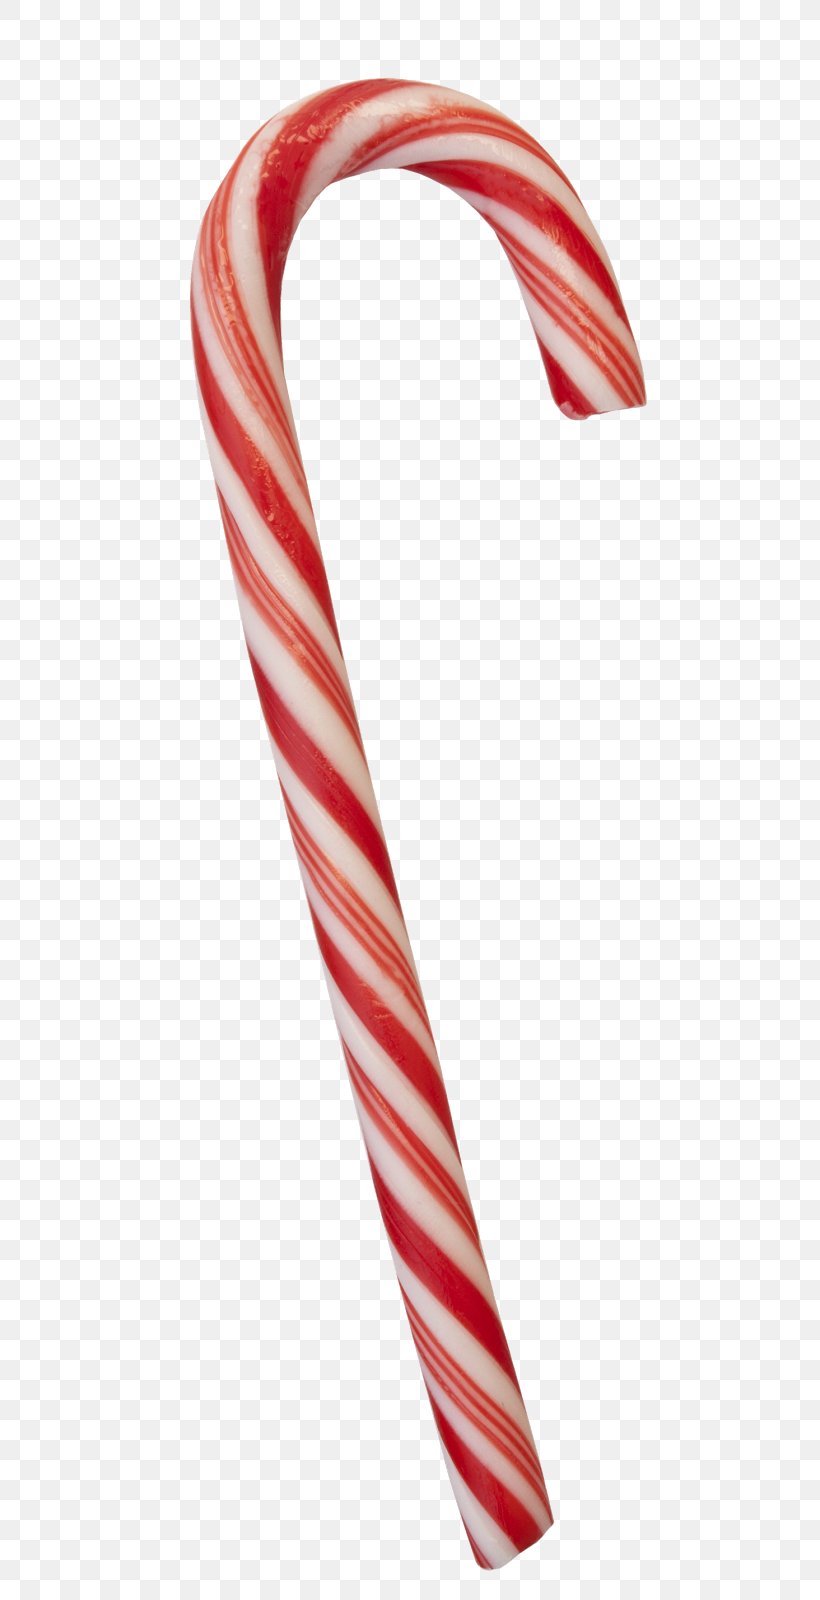 Candy Cane Christmas Clip Art, PNG, 616x1600px, Candy Cane, Candy, Caramel, Christmas, Dessert Download Free